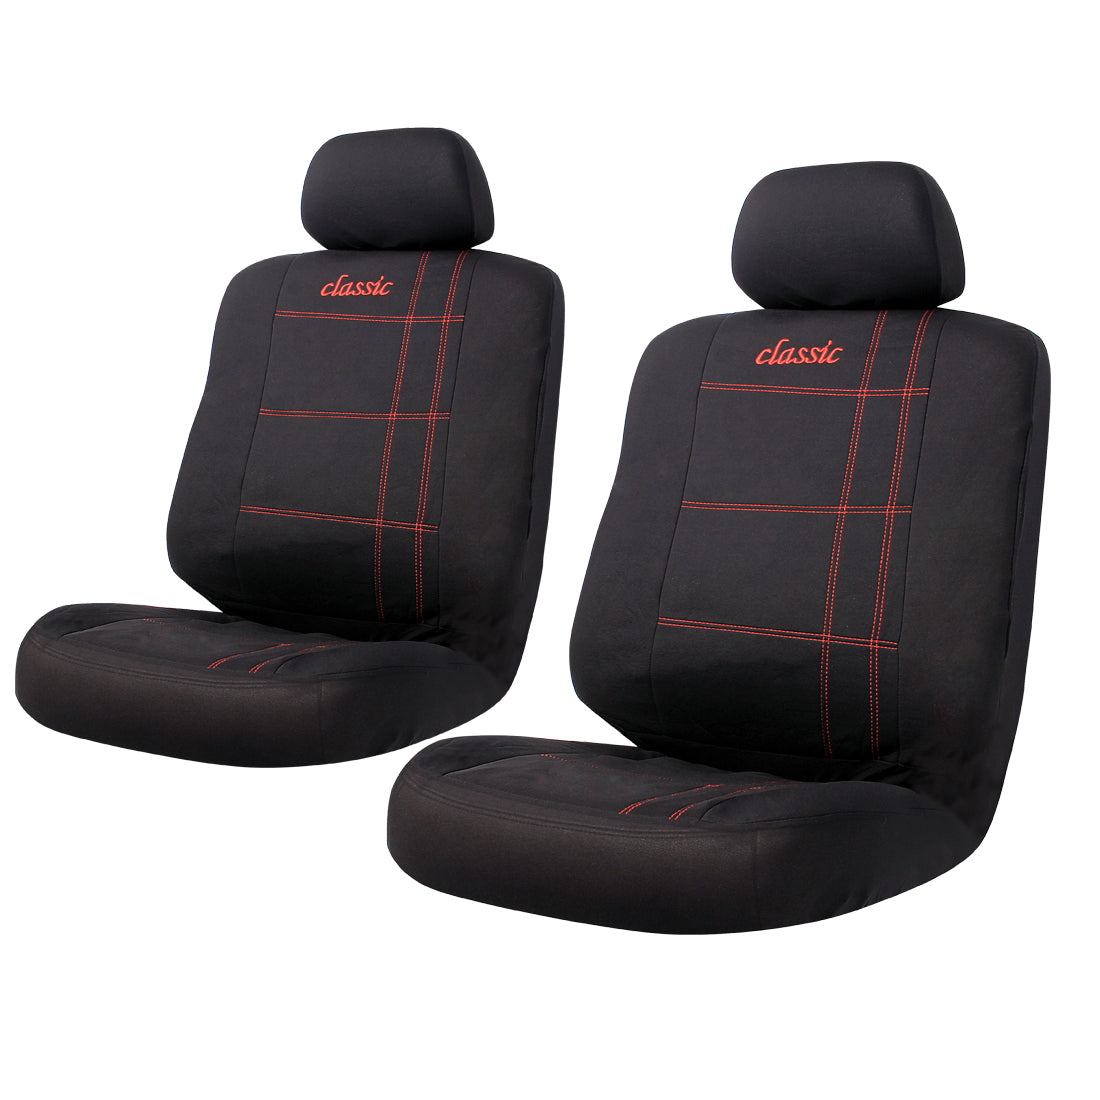 Full Set of Universal Fit Automotive Seat Covers fit for Hyundai